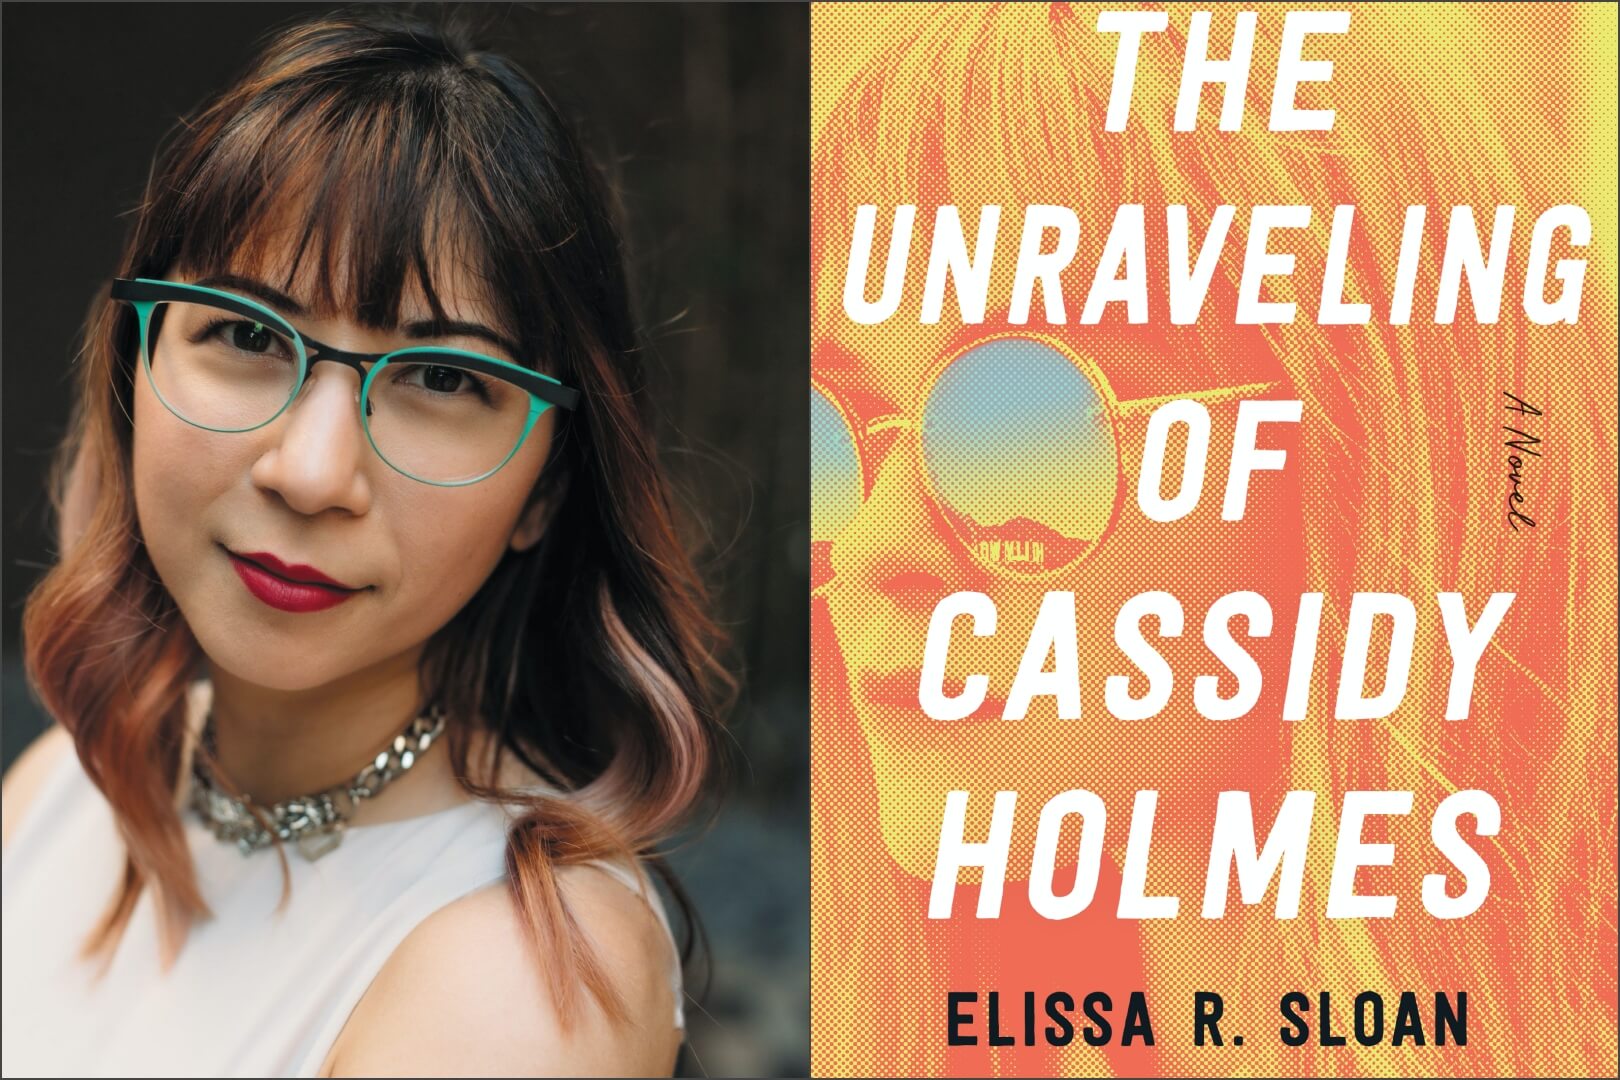 Q&A with Elissa R. Sloan, Author of The Unraveling of Cassidy Holmes